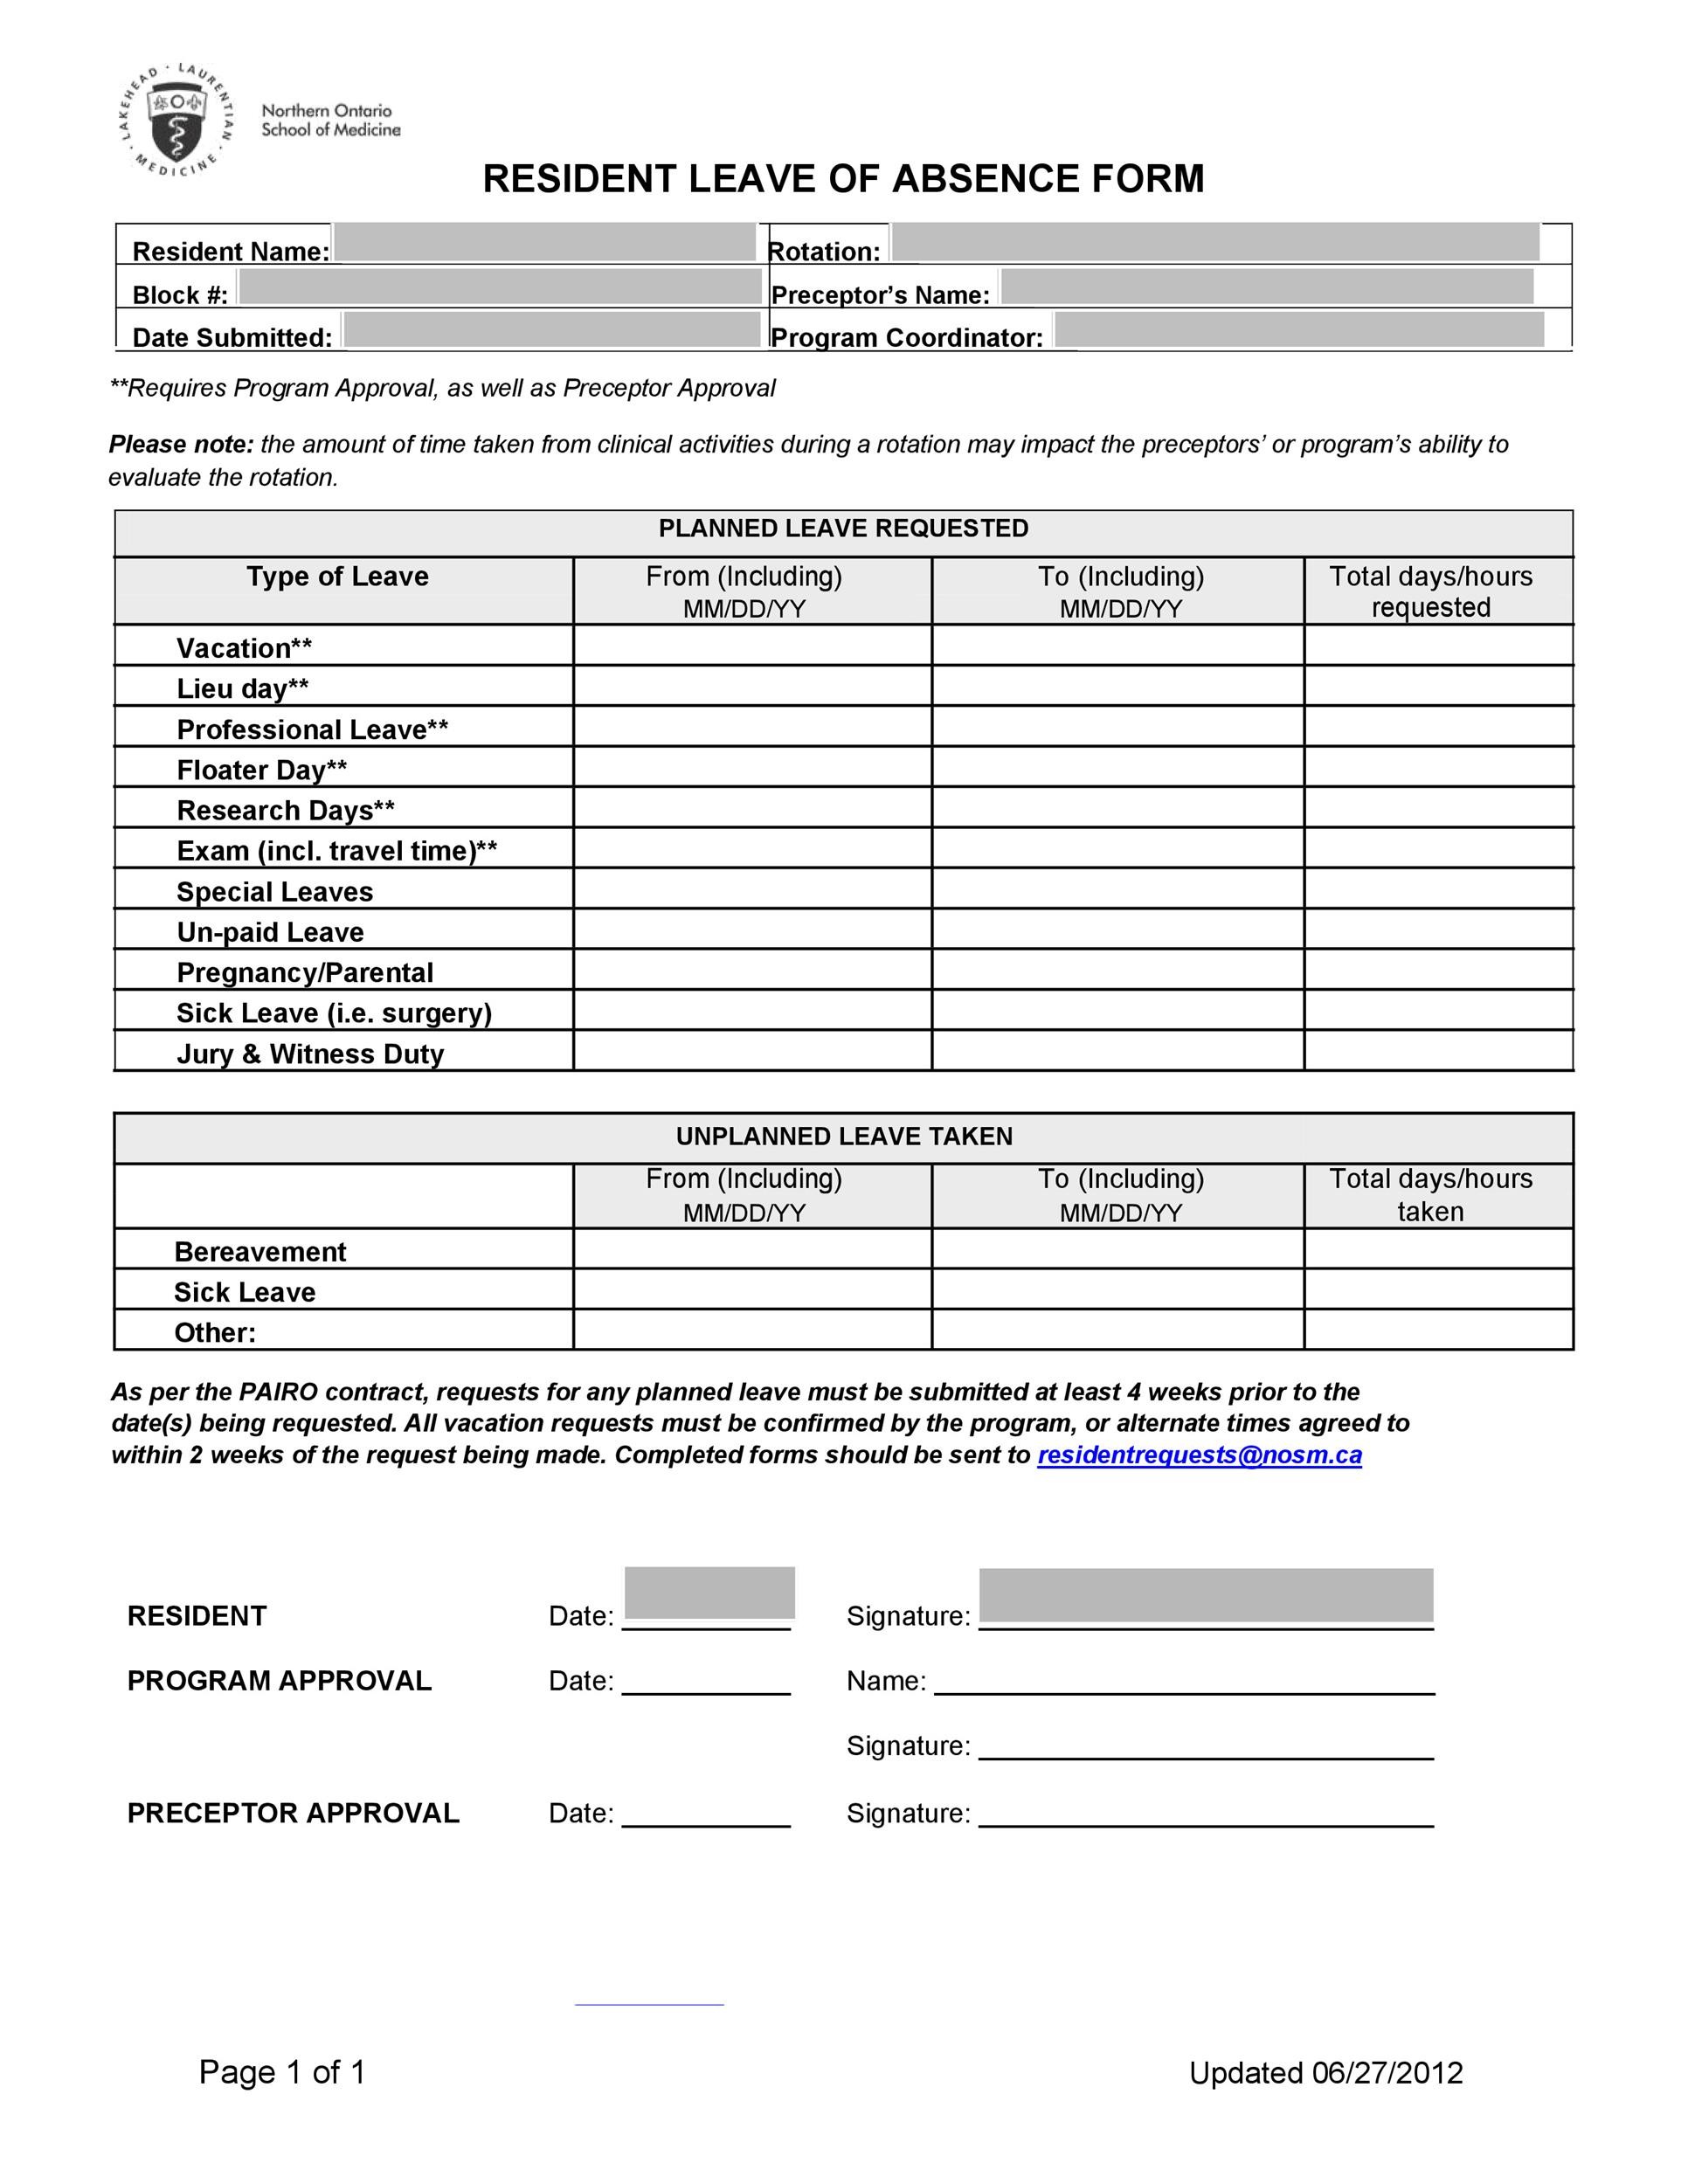 45 Free Leave of Absence Letters and Forms ᐅ Template Lab